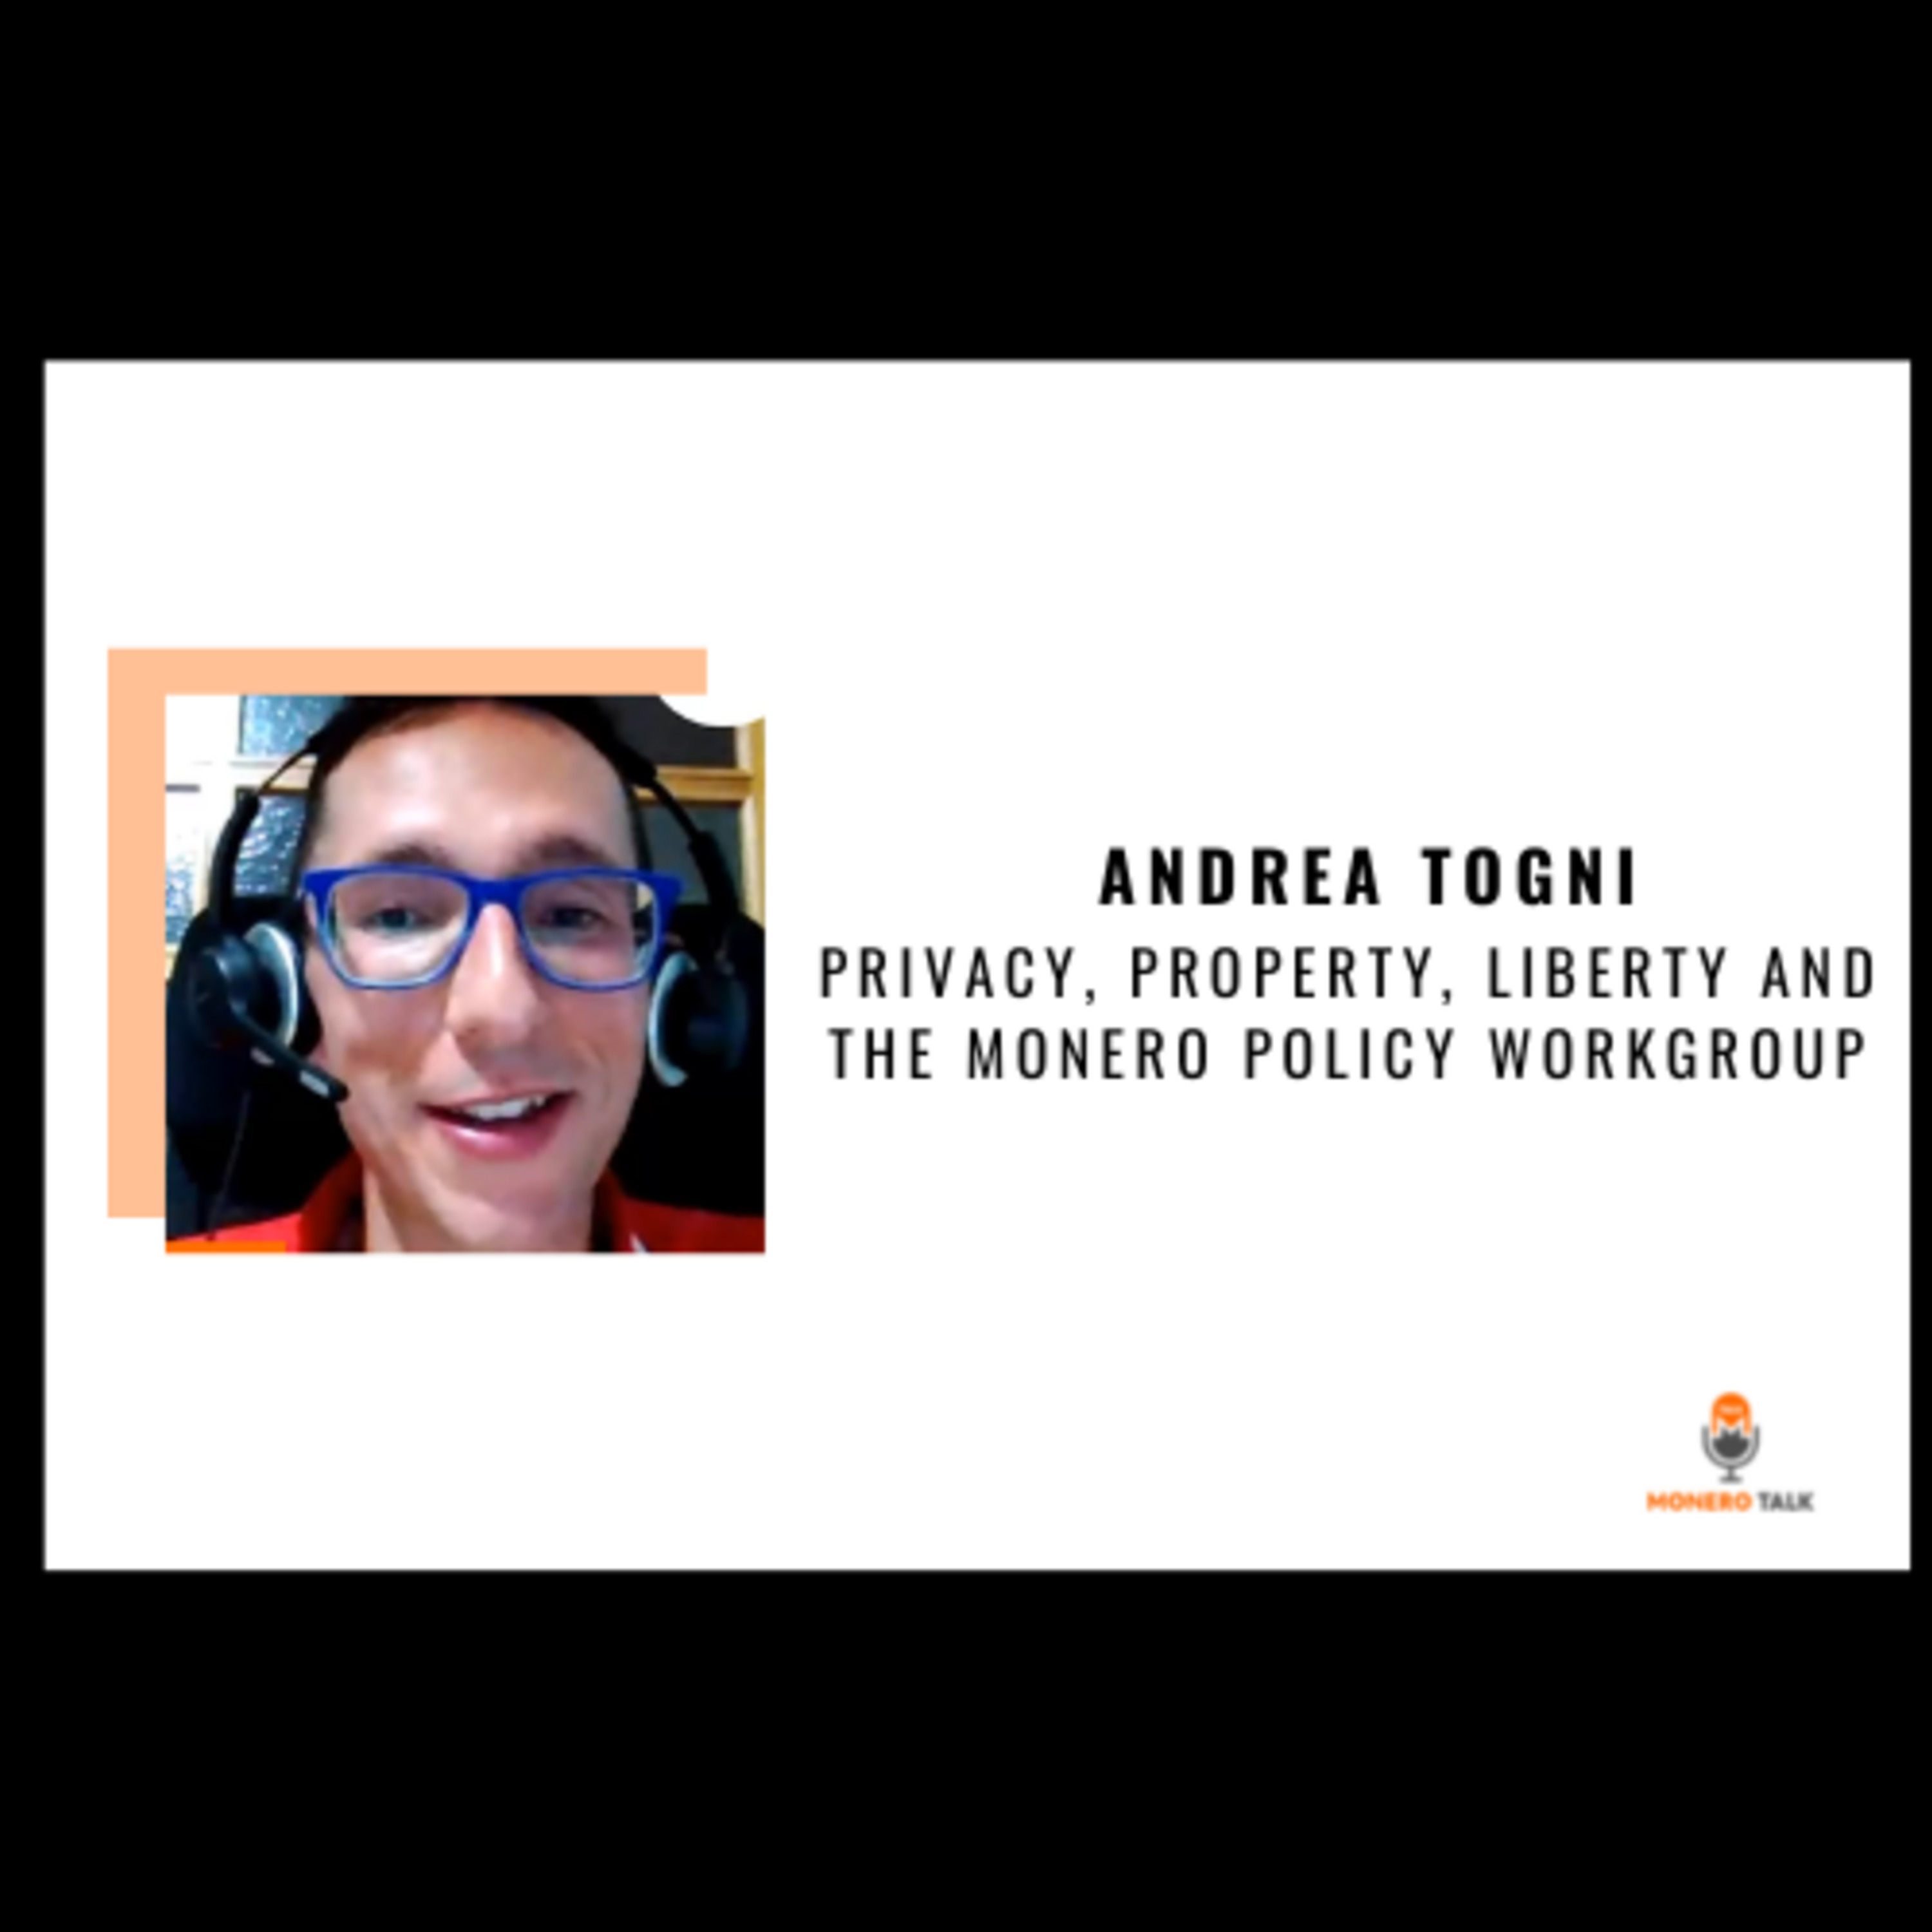 Andrea Togni - Privacy, Property, Liberty and the Monero Policy Workgroup